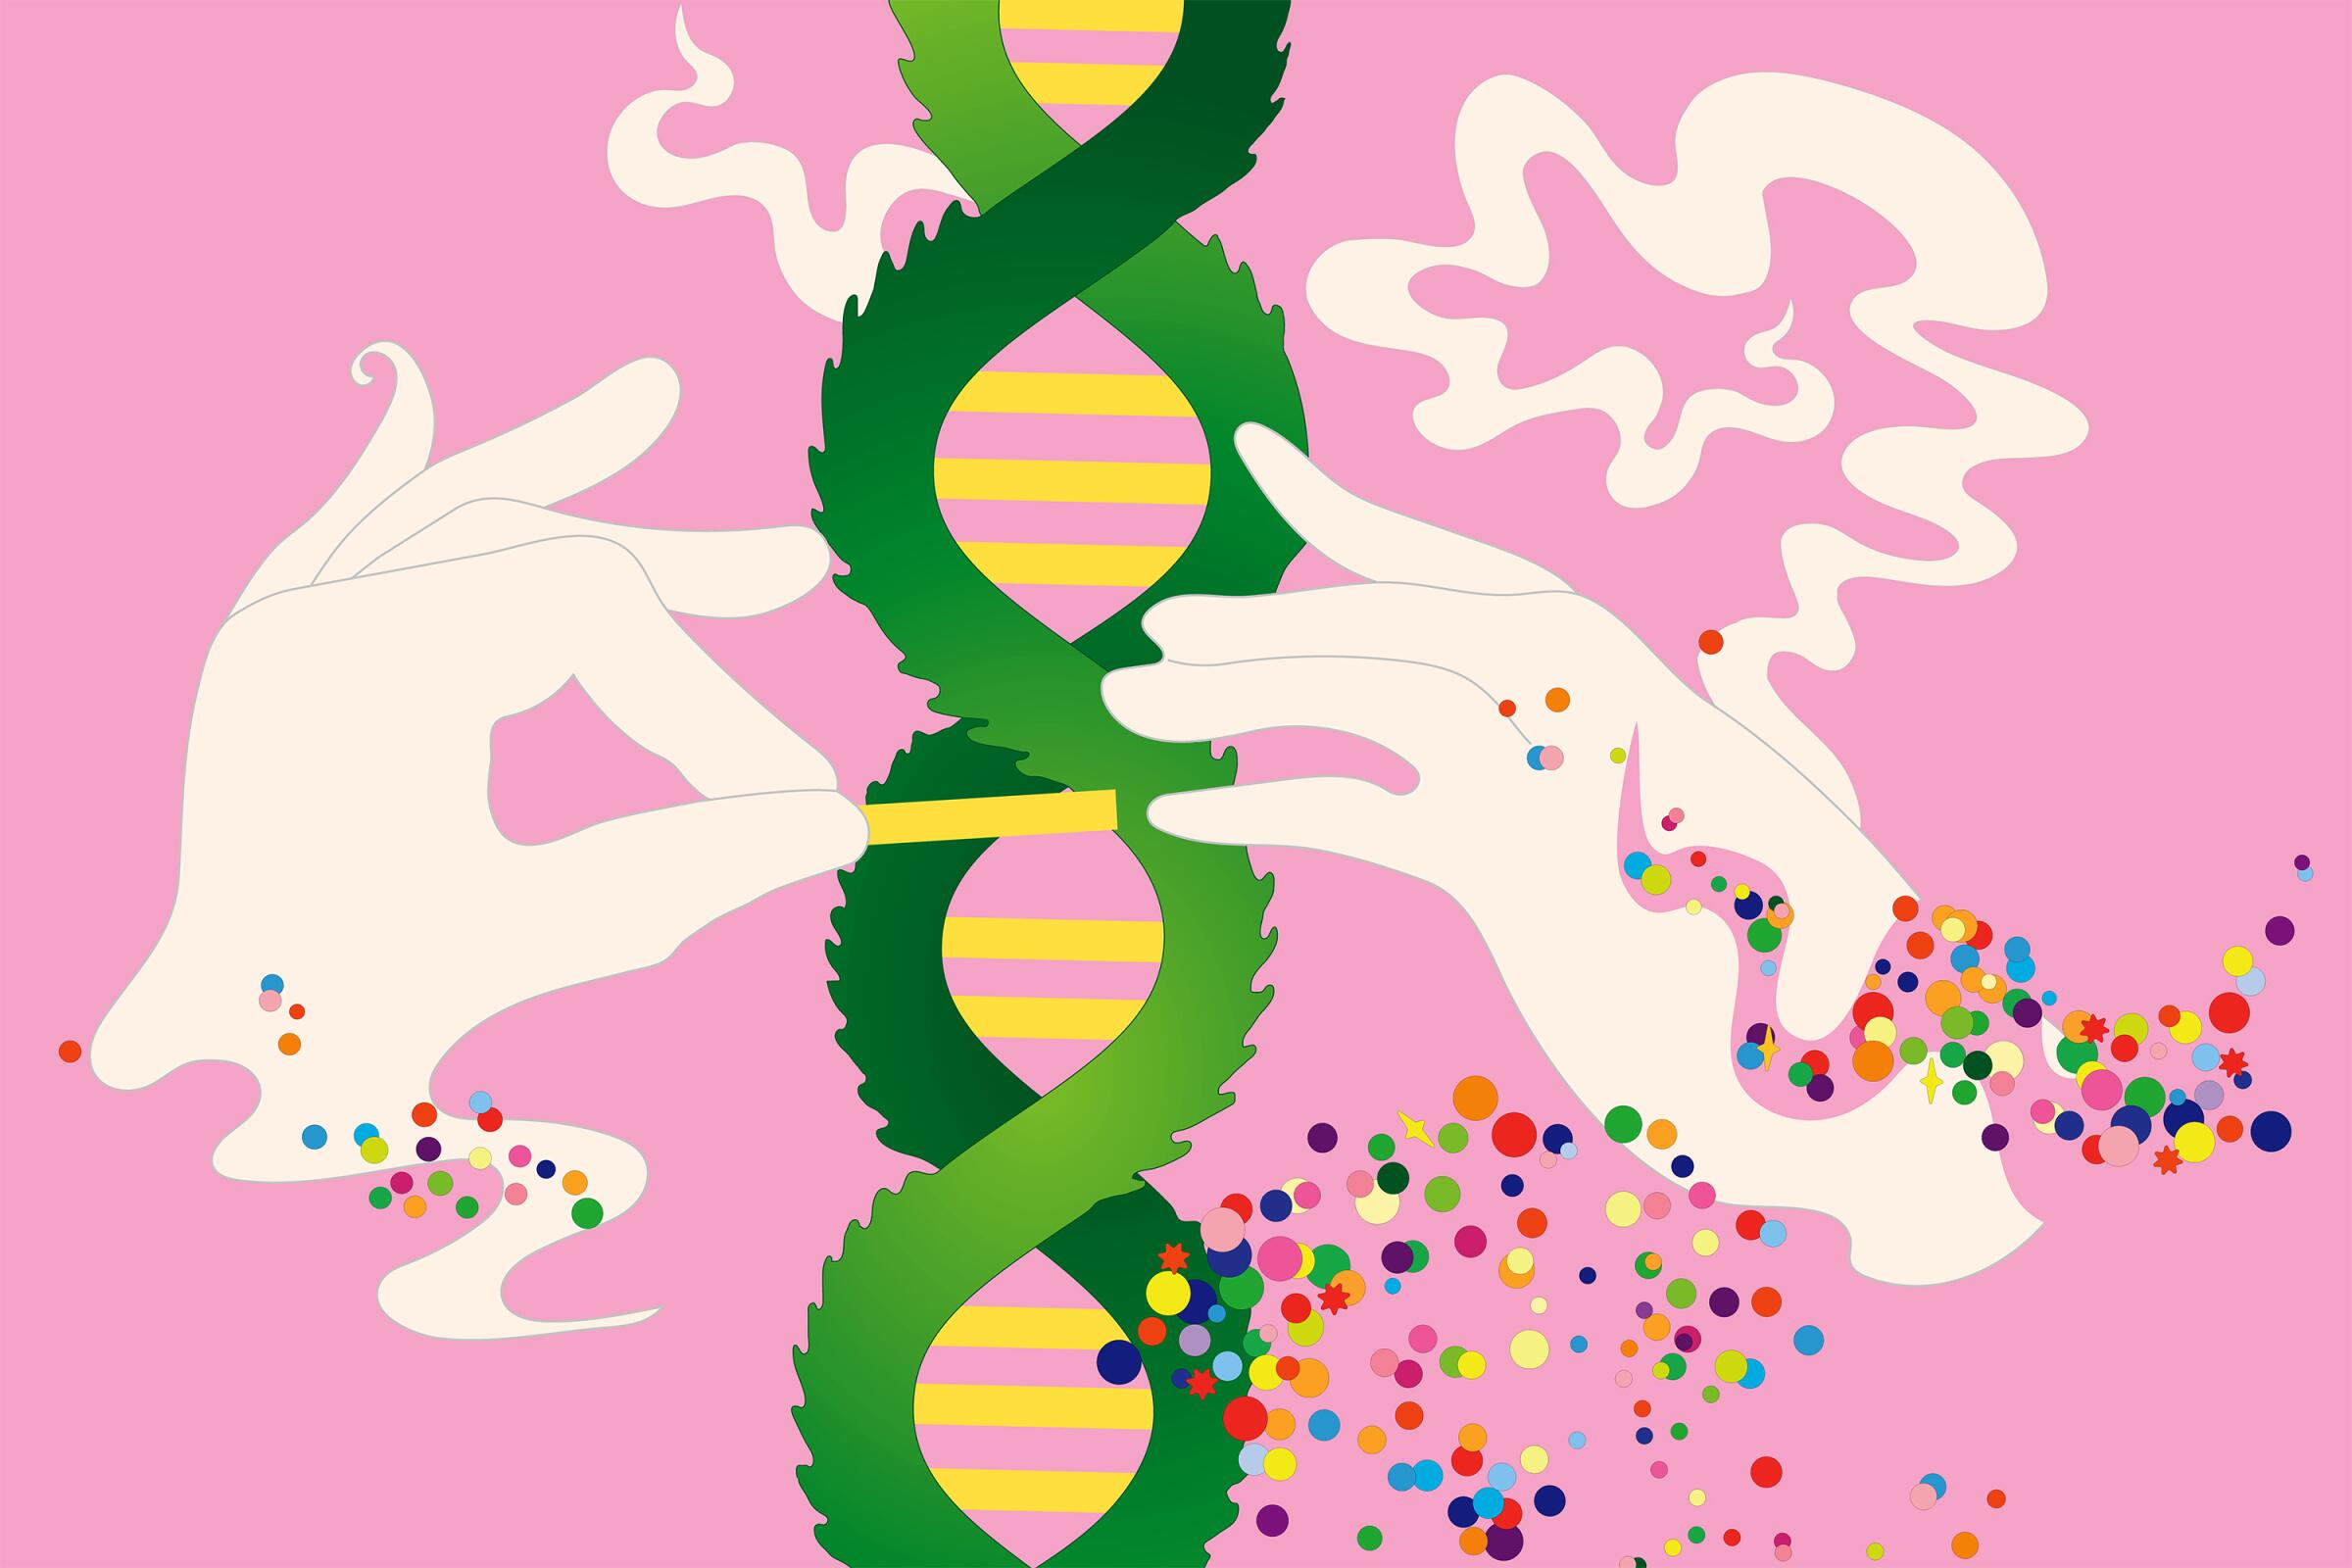 Illustration of two hands holding a joint in front of a DNA double helix